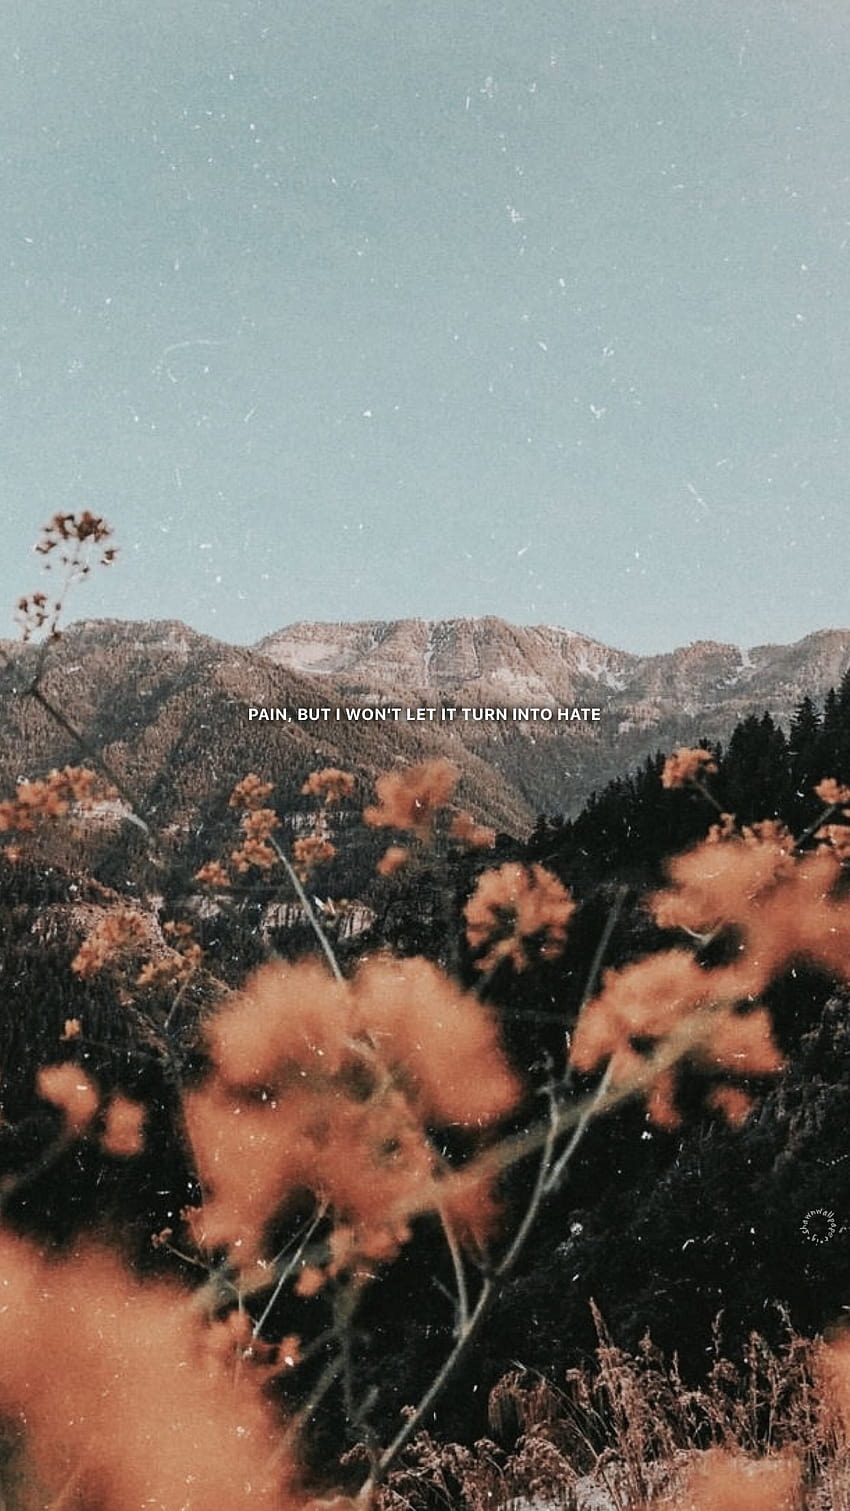 Aesthetic background image of a mountain with a quote about pain - HD